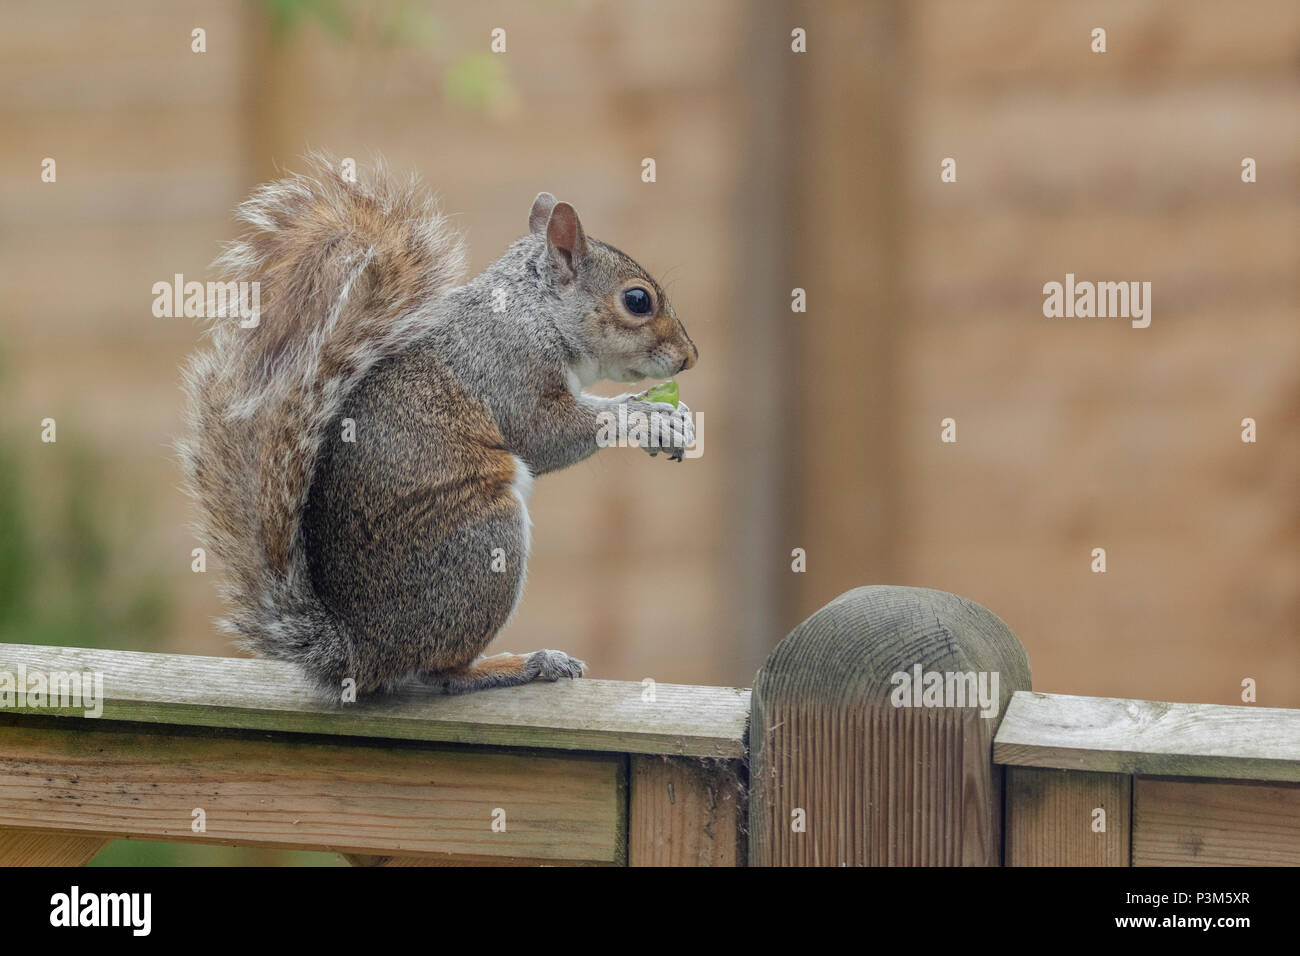 Grey squirrel (UK) on a garden fence. The squirrel is eating a small unripe apple. Stock Photo